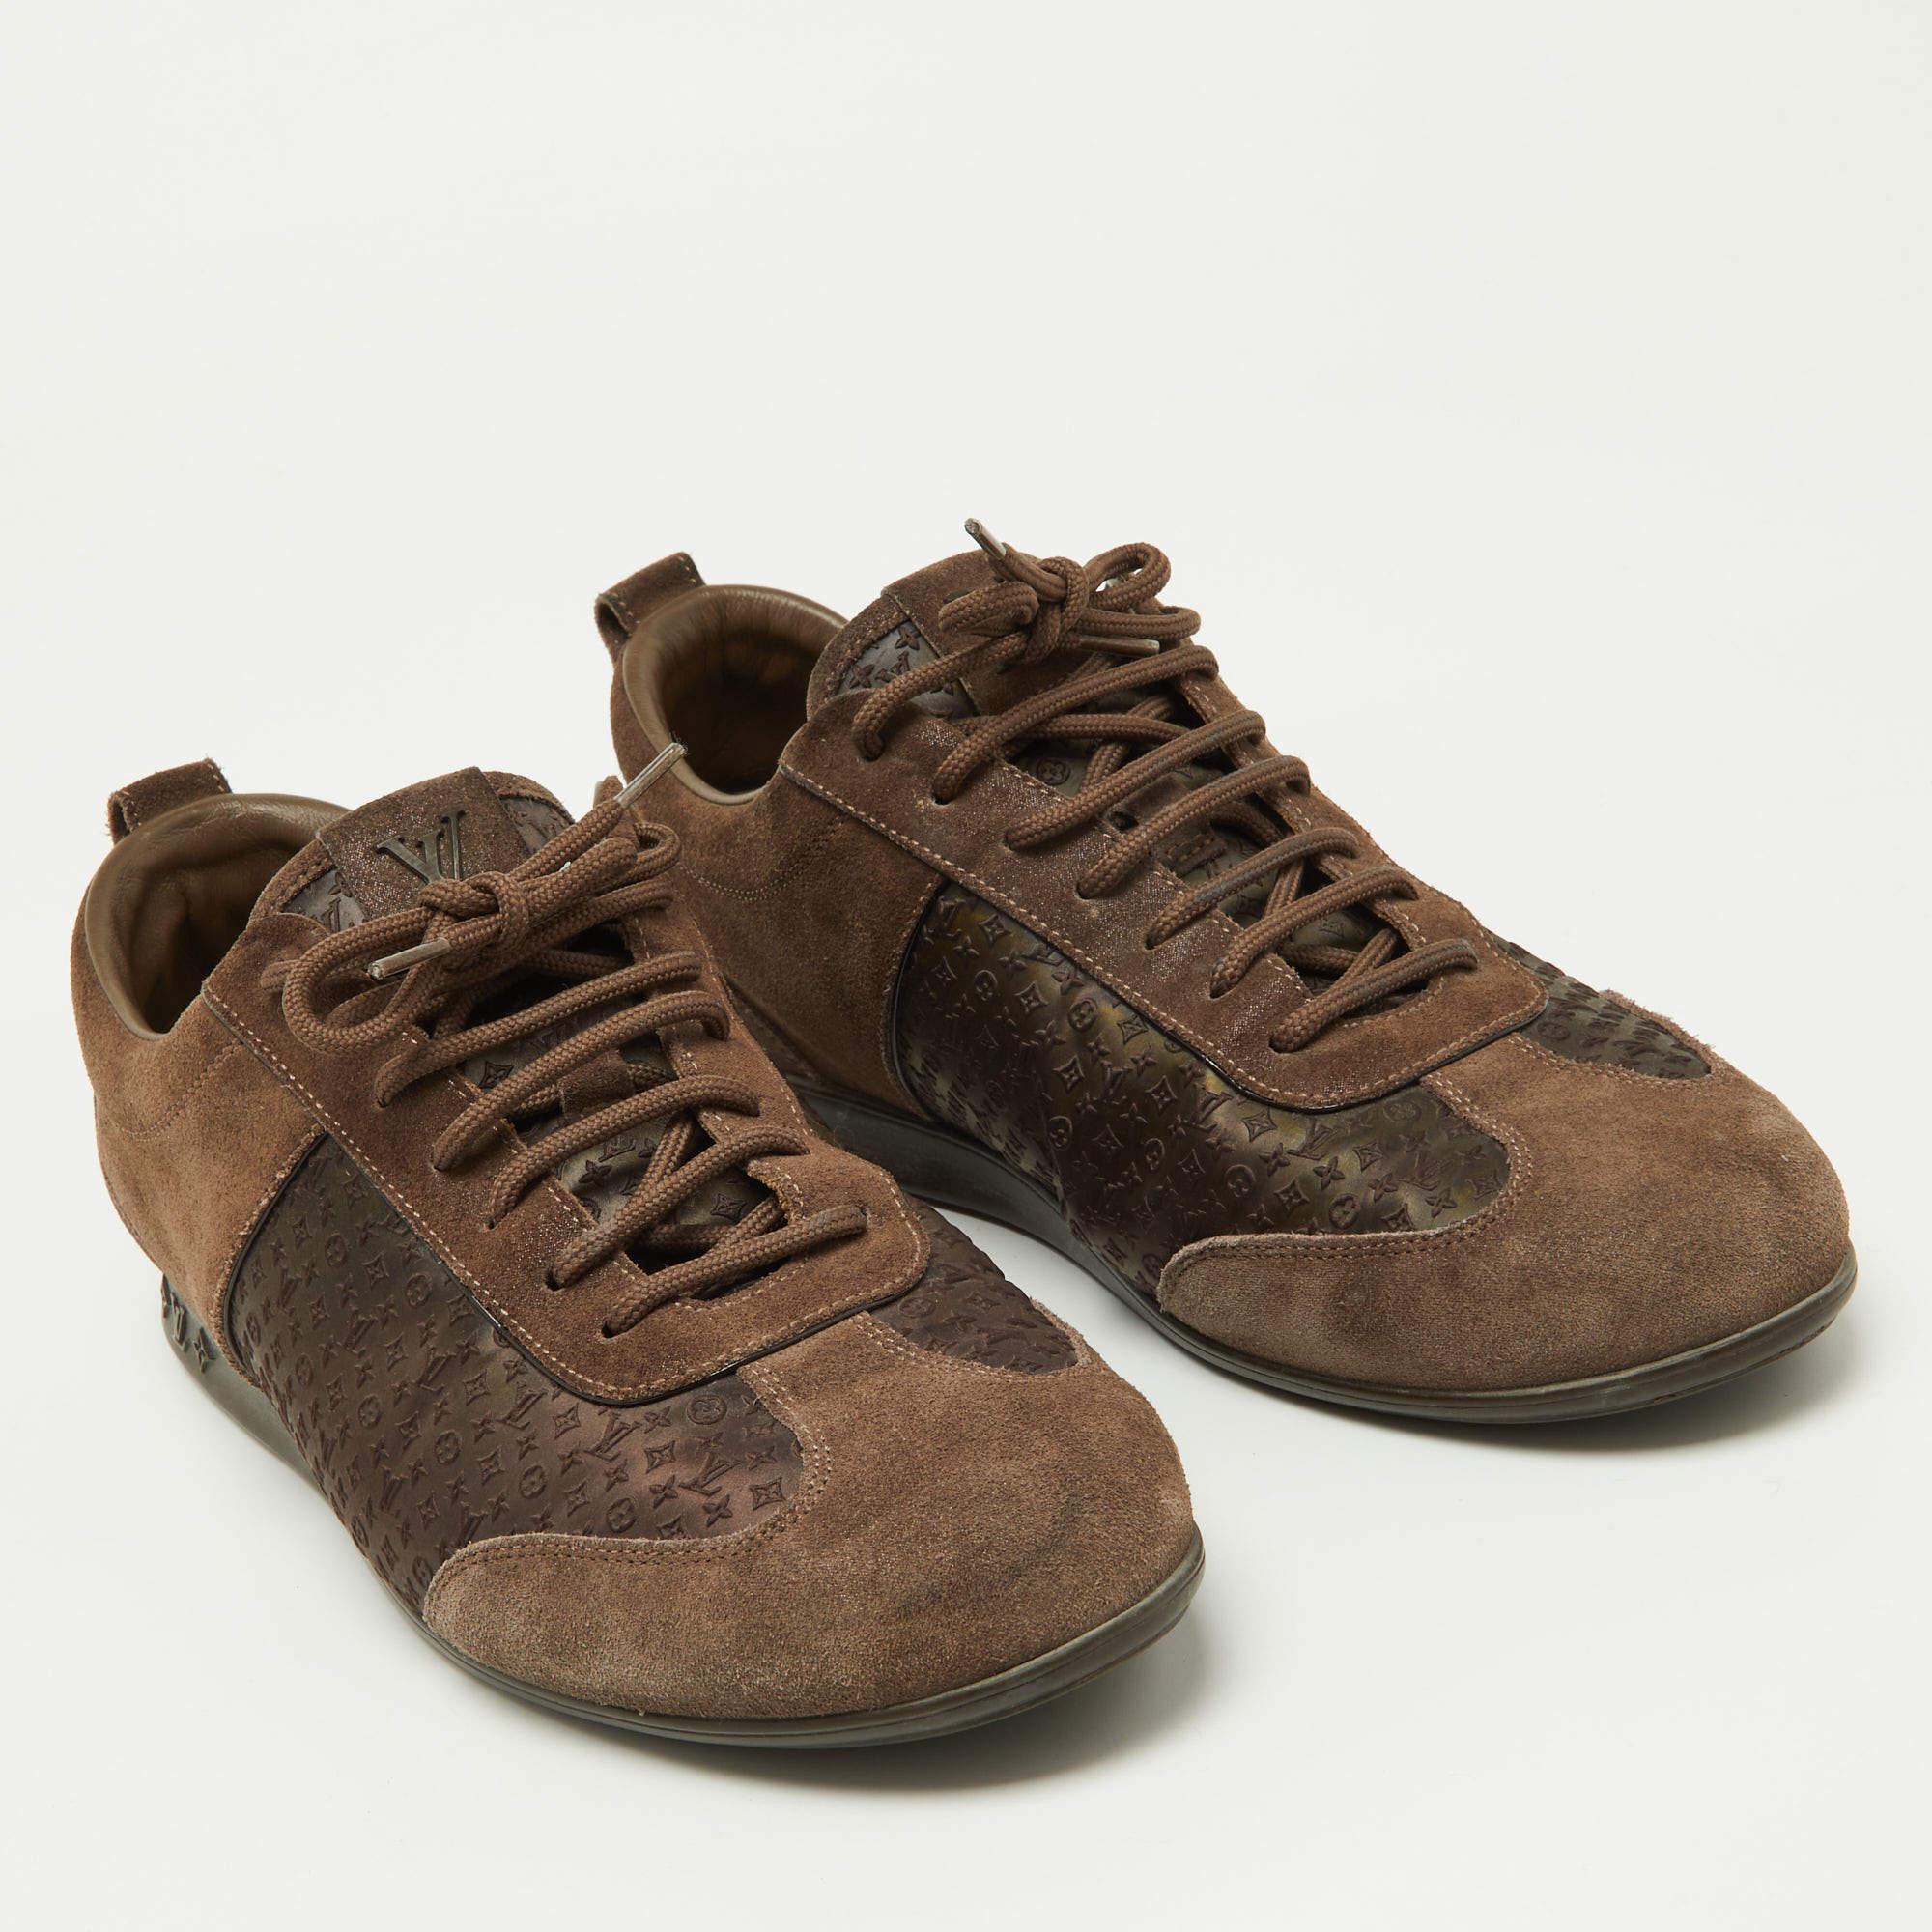 Women's Louis Vuitton Brown Textured Suede and Monogram Fabric Low Top Sneakers Size 39. For Sale